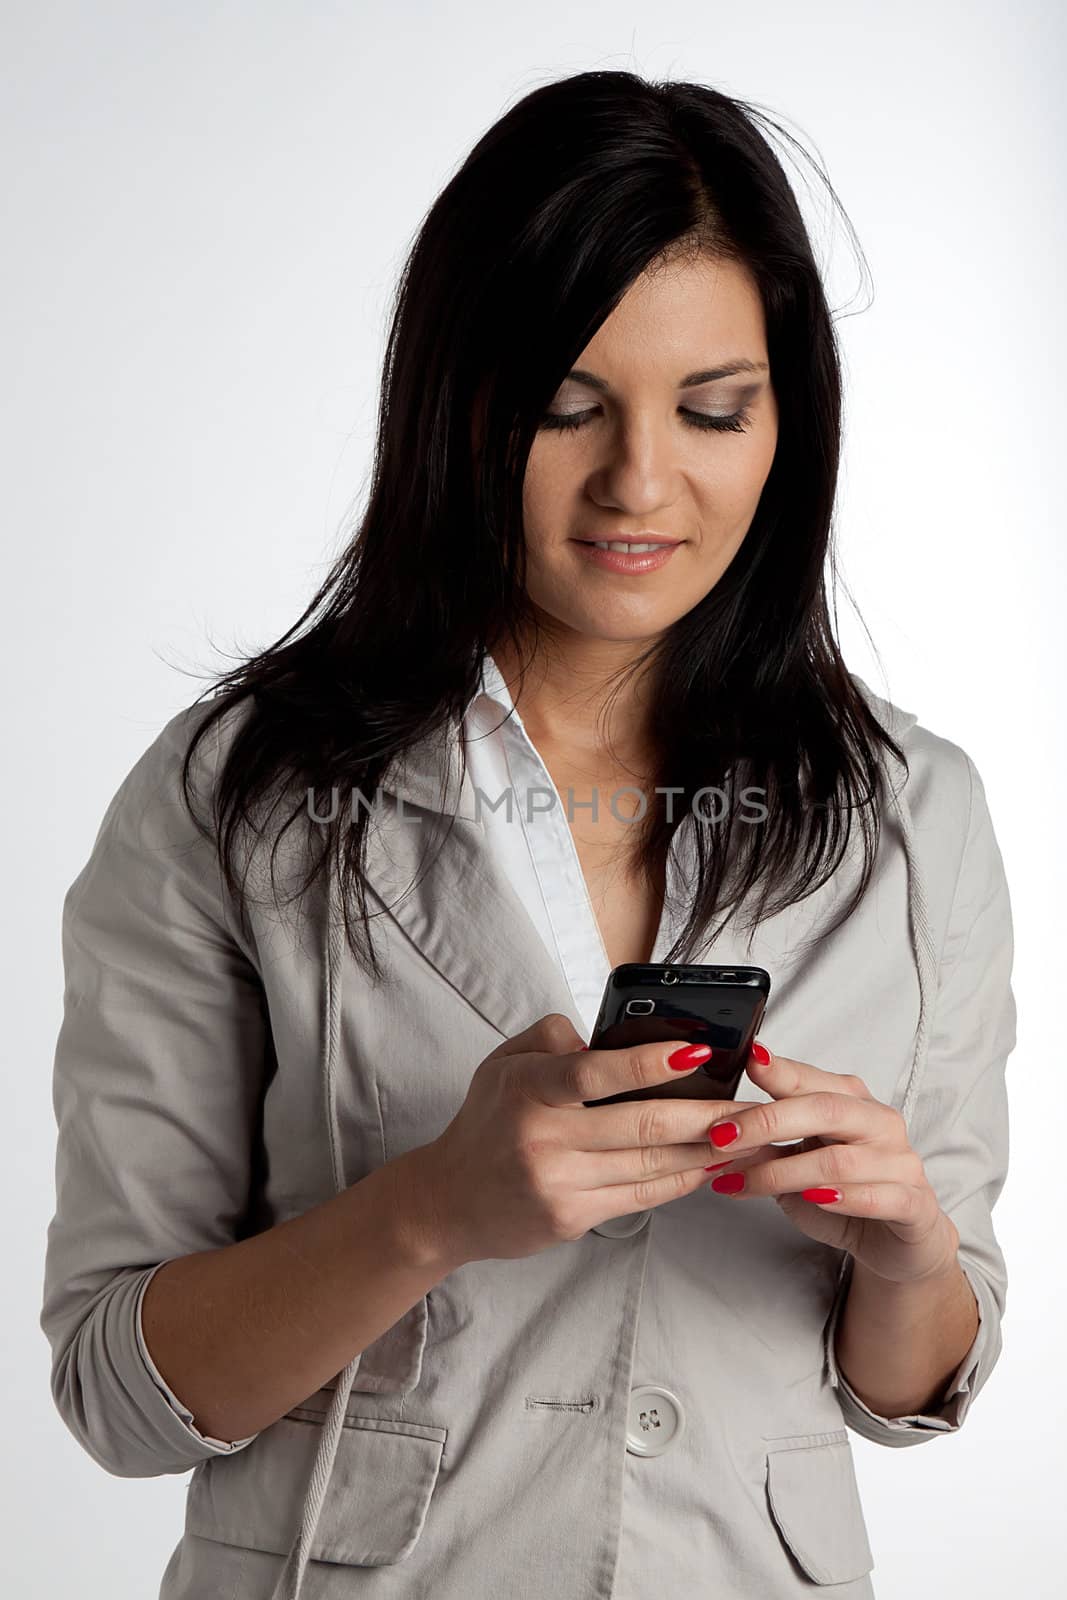 Image of young pretty people receiving SMS on your mobile phone